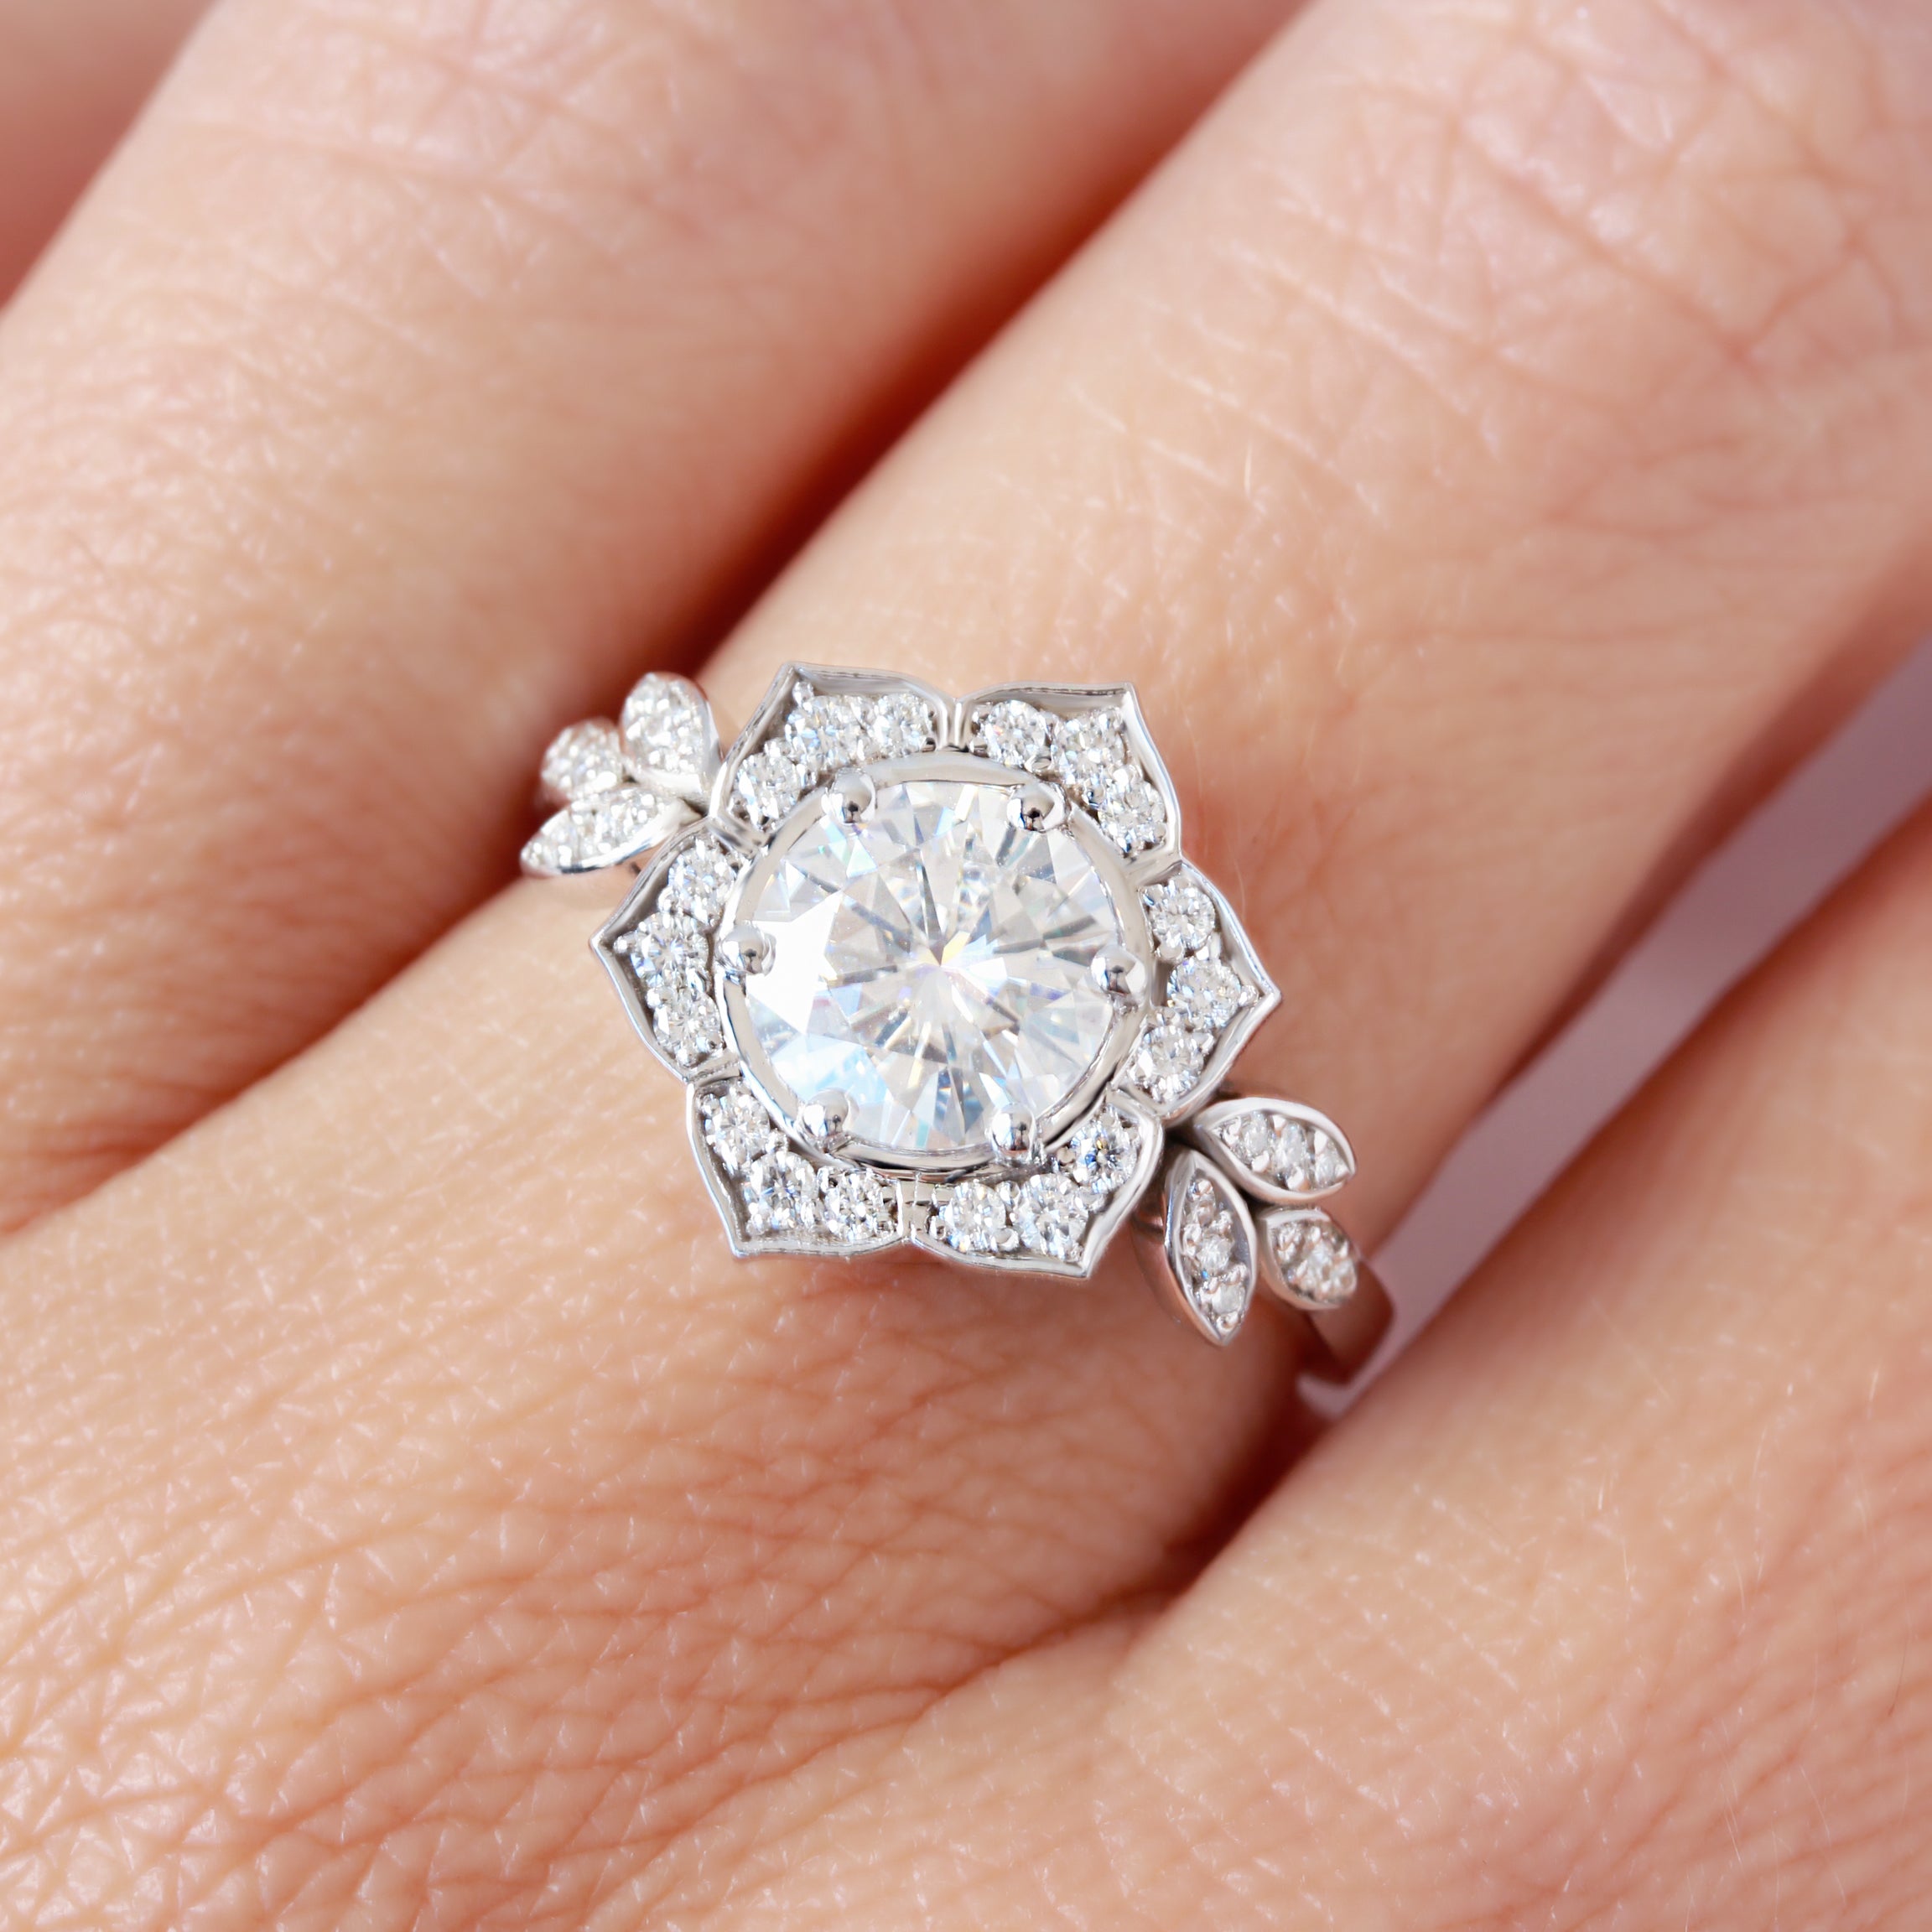 2ct Diamond Flower Engagement Ring, Two Rings Set - "Lily Pond" & "Hermes" ♥